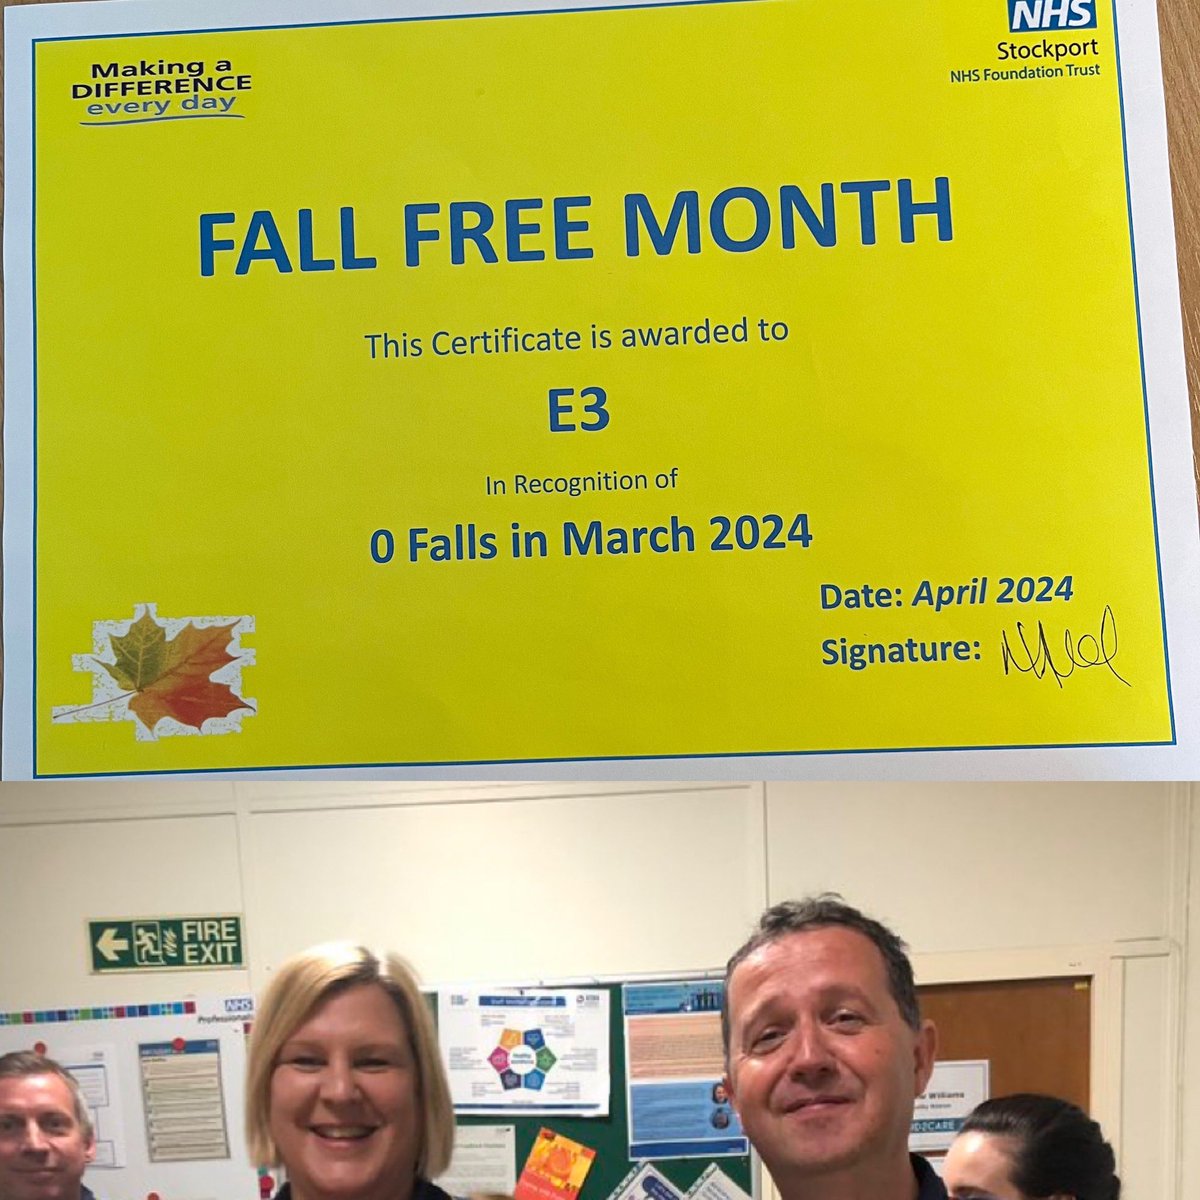 Time to celebrate 0 falls in March @StockportNHS well done E3 👏👏@helshow1 @NicolaFirth6 @AoifeIsherwood @StockportPtExp @mcquakee @DavidPickersg13 @rchamoto @lee_woolfe @MarisaLoganWar1 @falls_network @nhsdavies @SueACarroll 🍁🍁🍁🍁